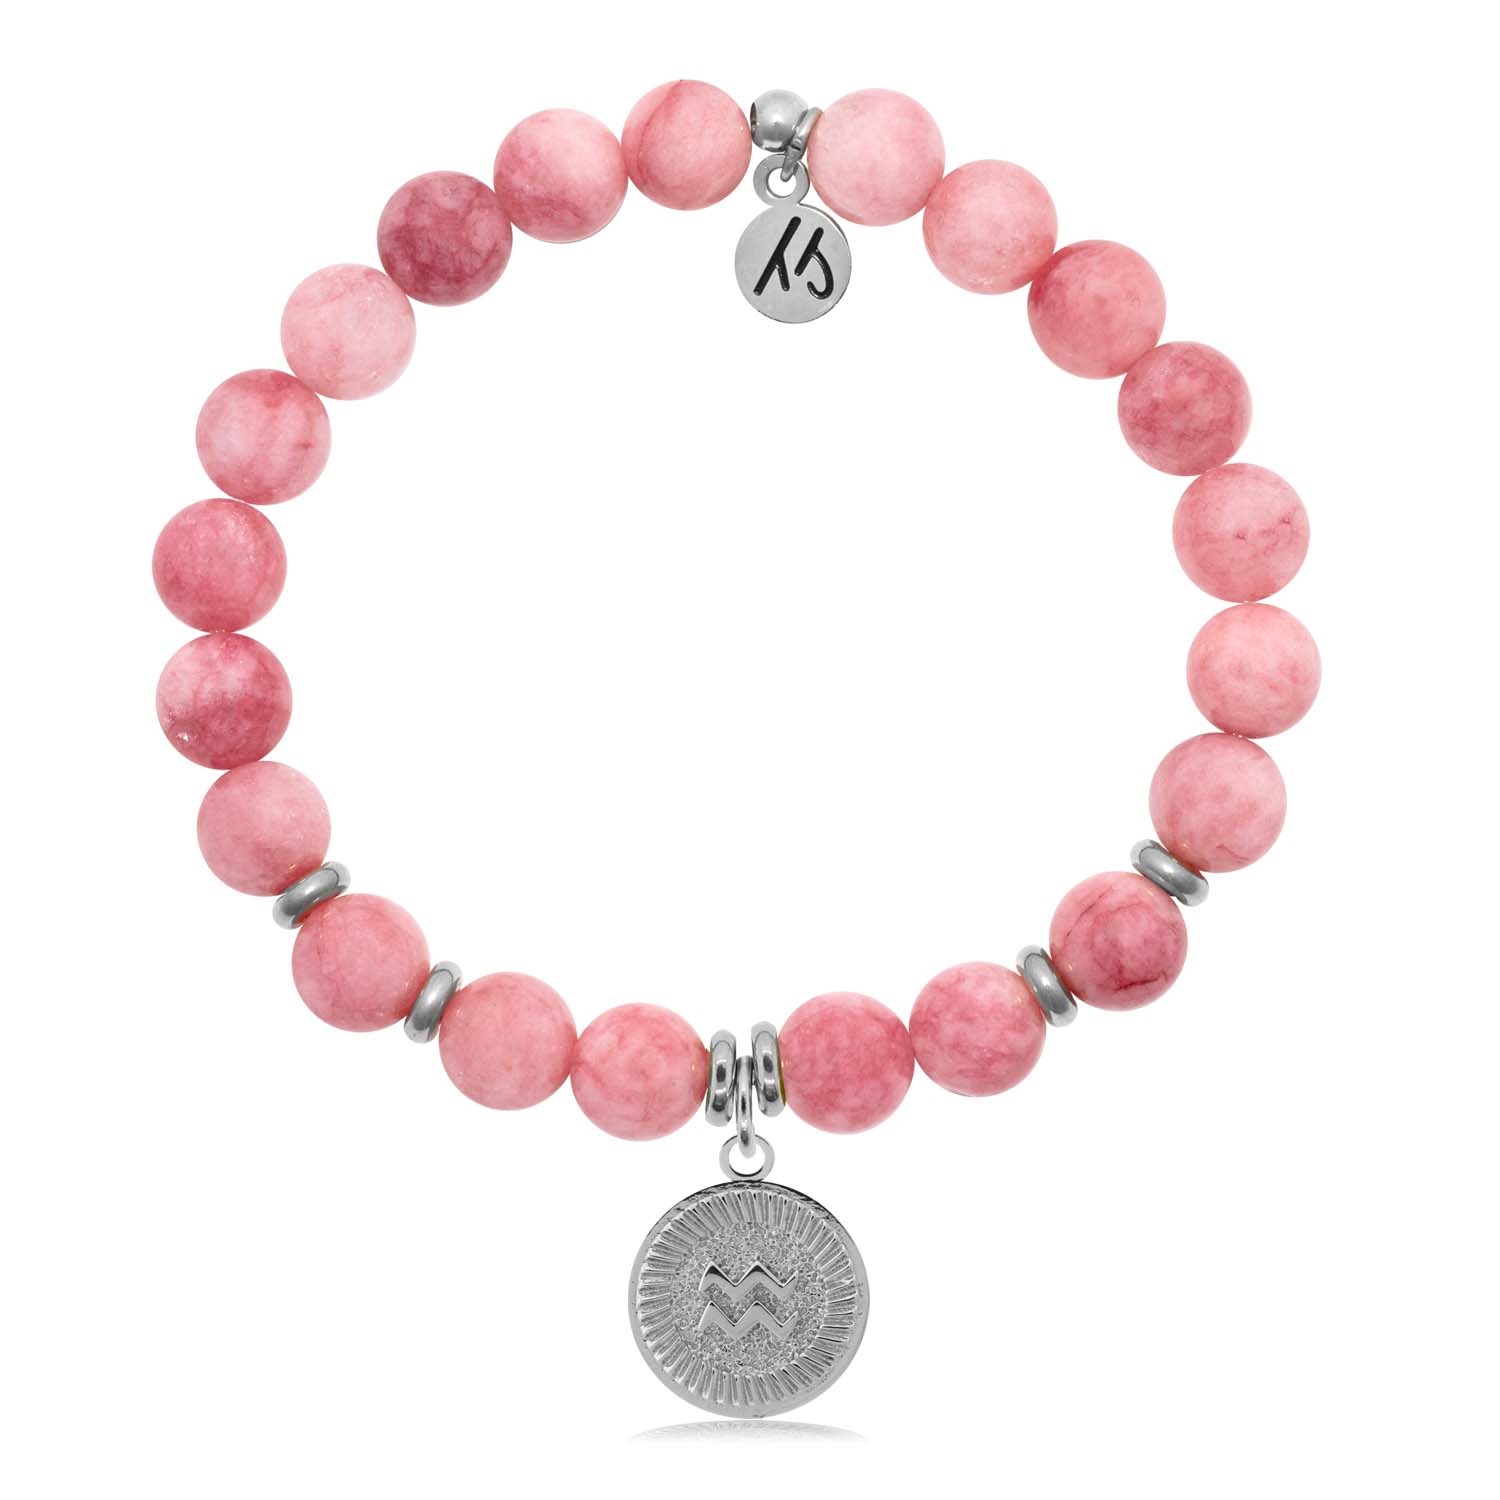 Zodiac Collection - Pink Jade Stone Bracelet with Capricorn Sterling Silver  Charm | T. Jazelle